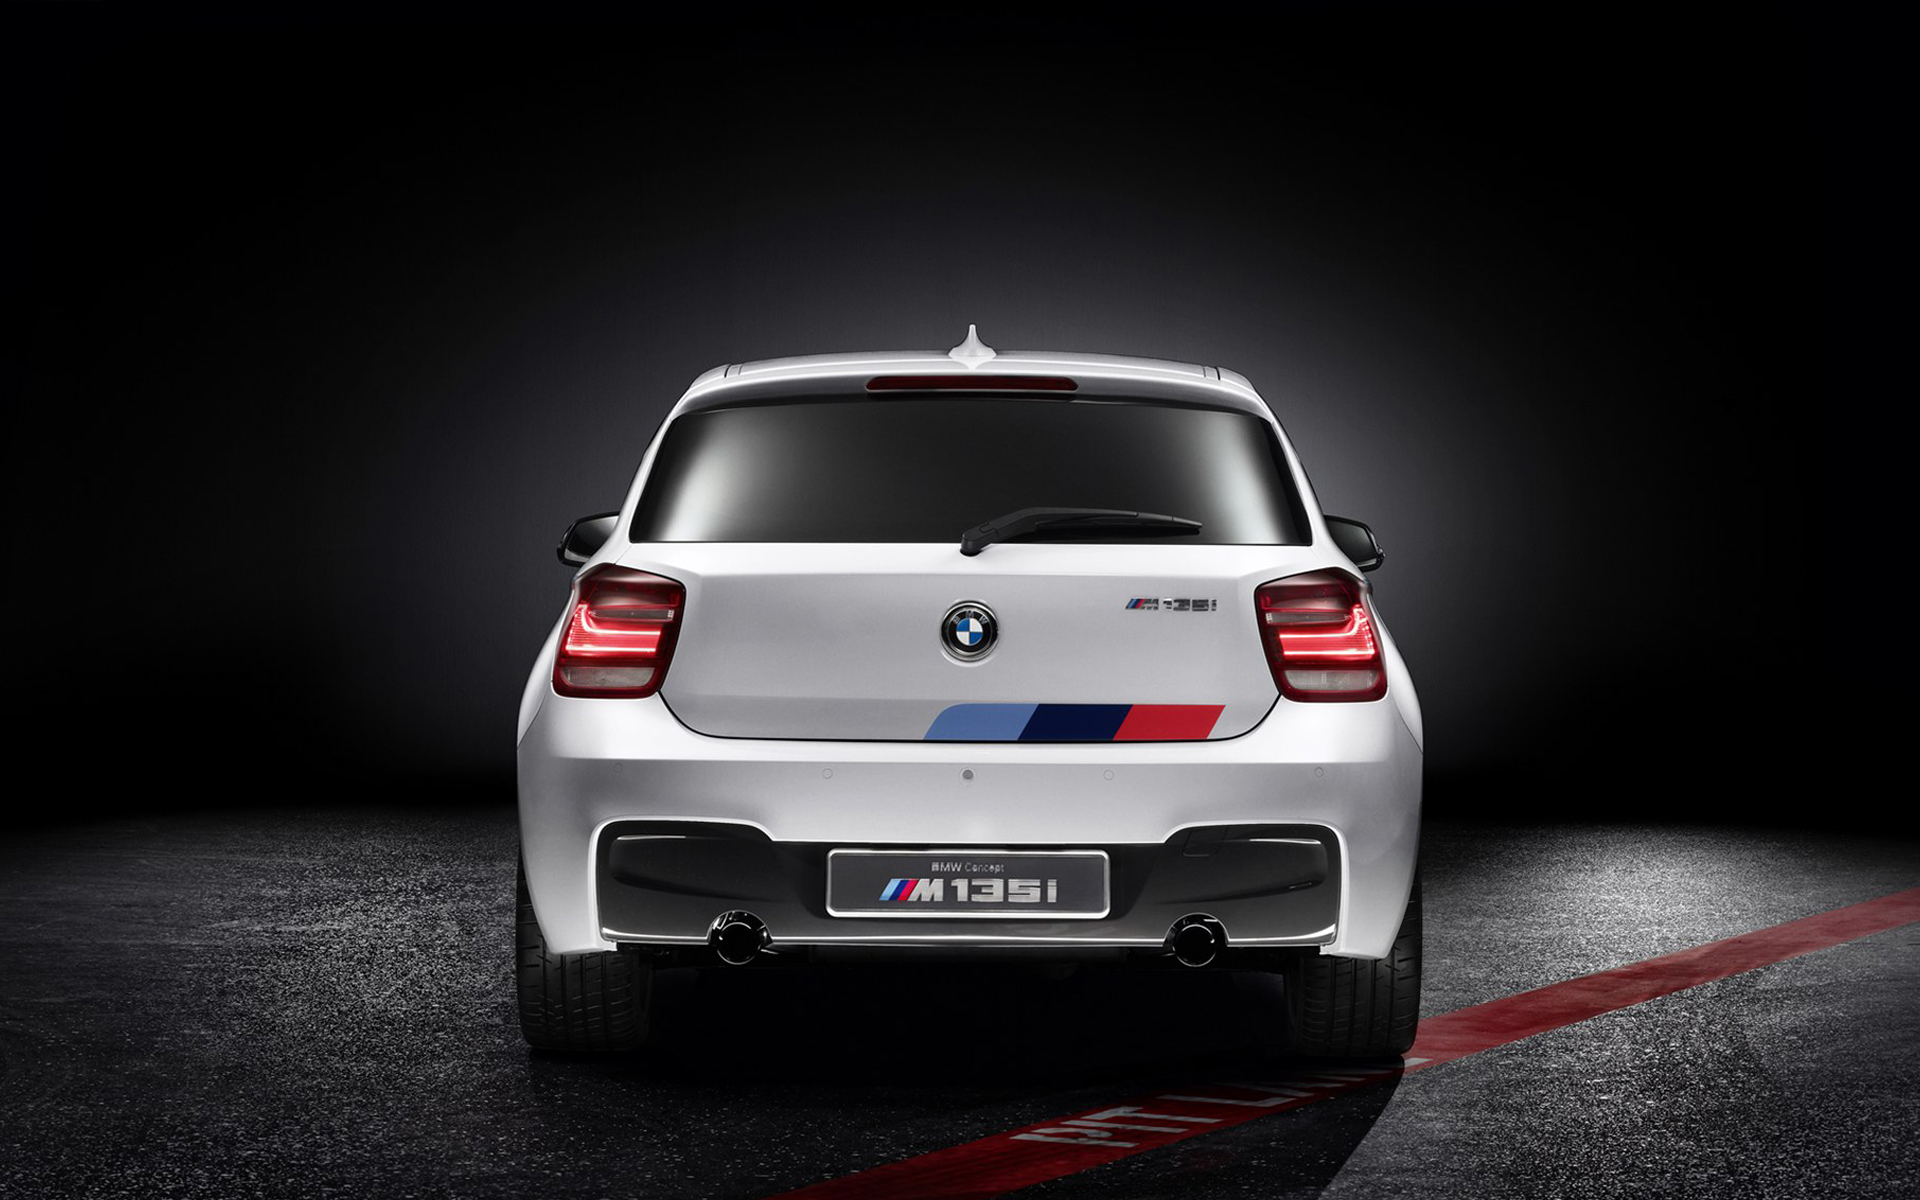 Bmw M135i Concept Carshow HD Wallpaper Car Pictures